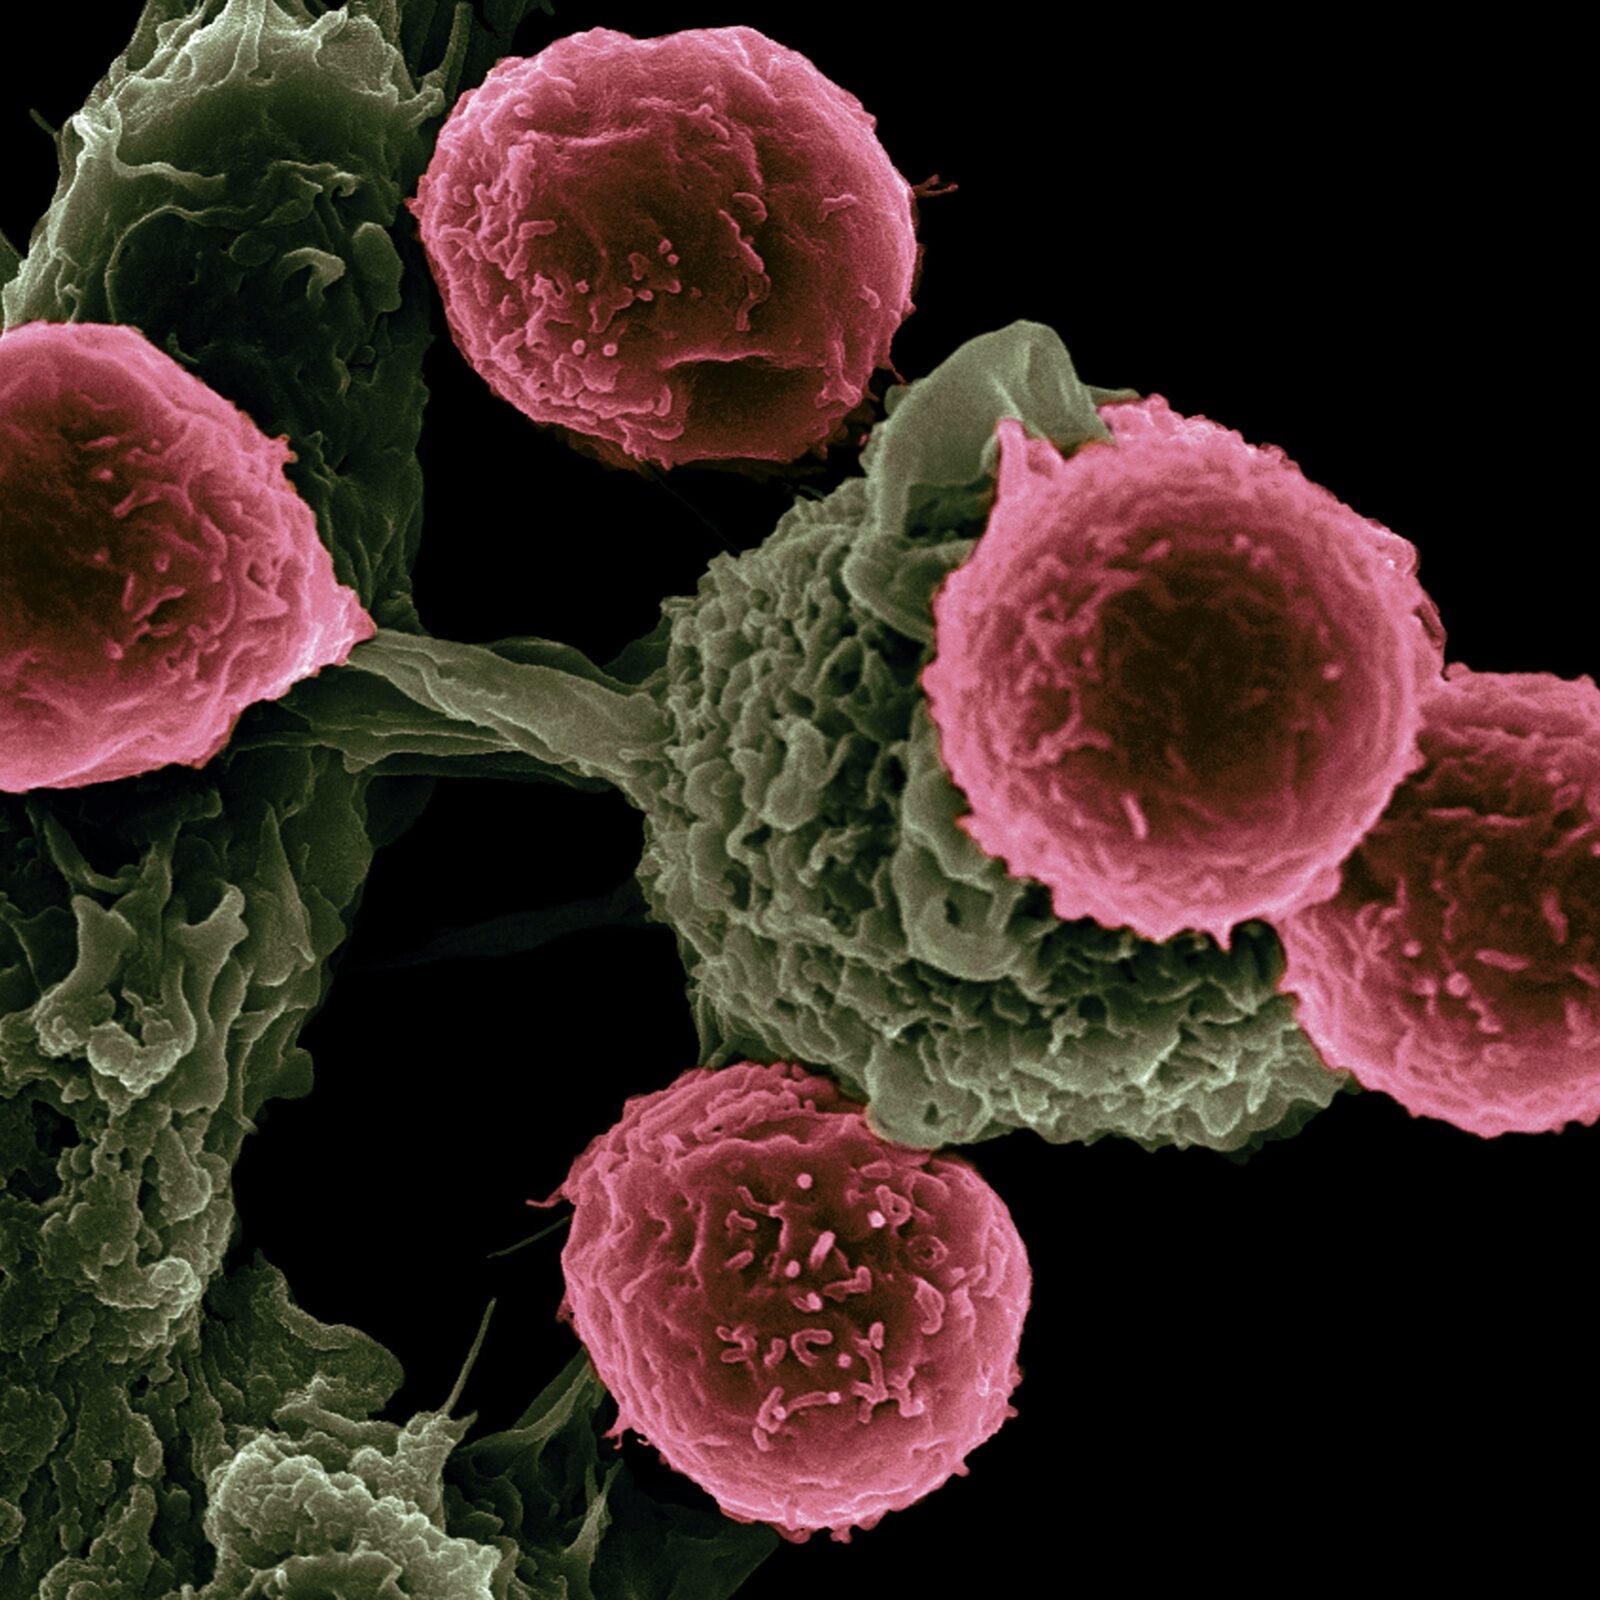 Cancer cells that can be cured by marine bacteriun